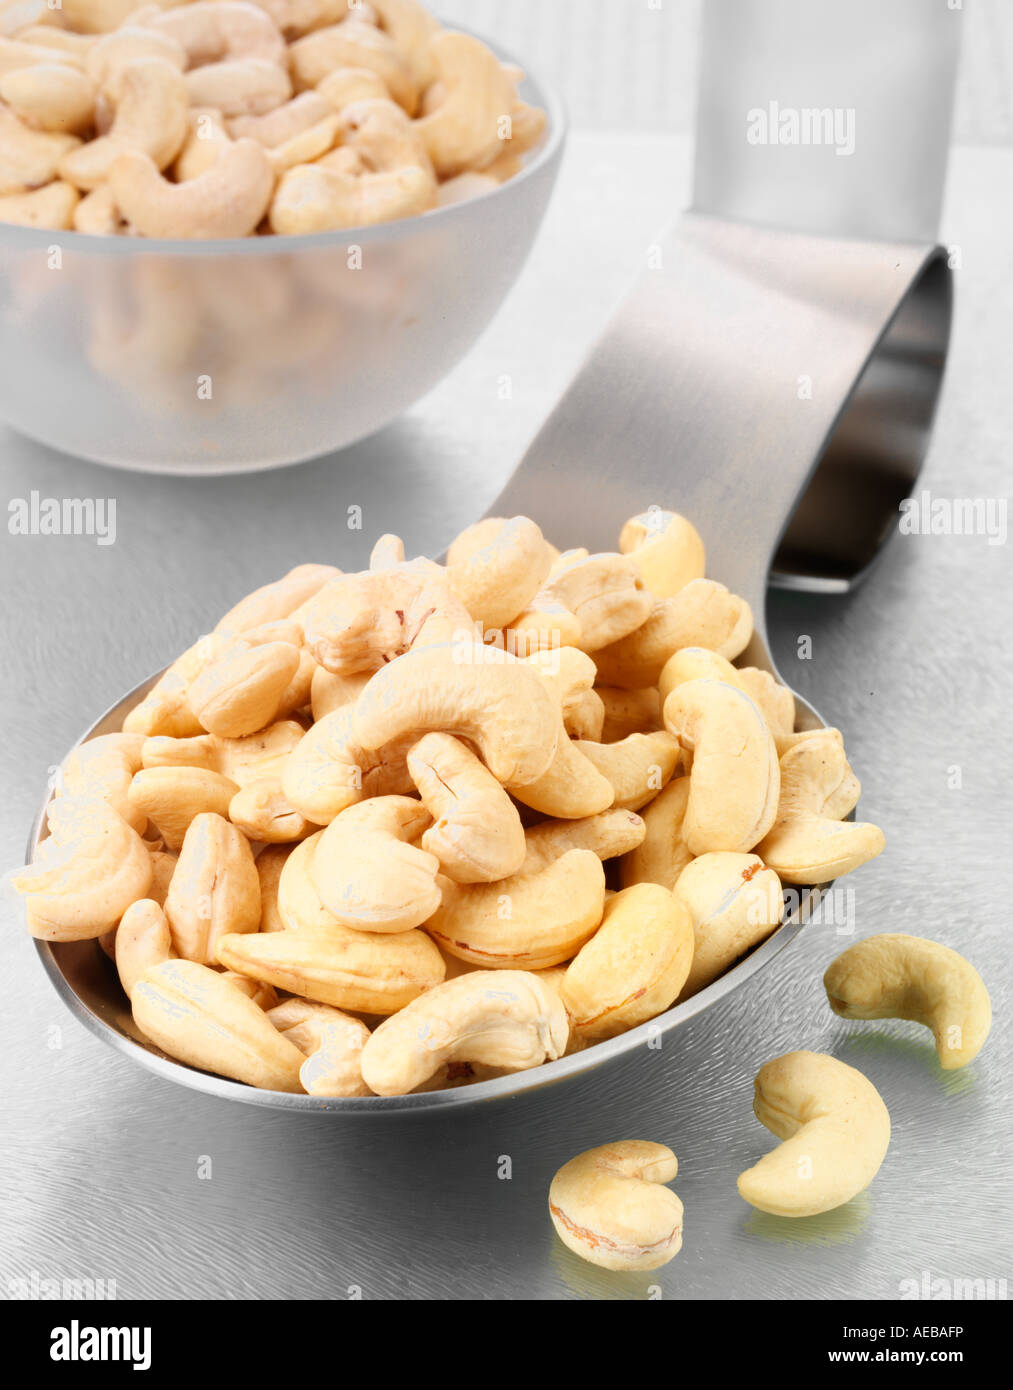 SPOONFUL OF CASHEW NUTS Stock Photo